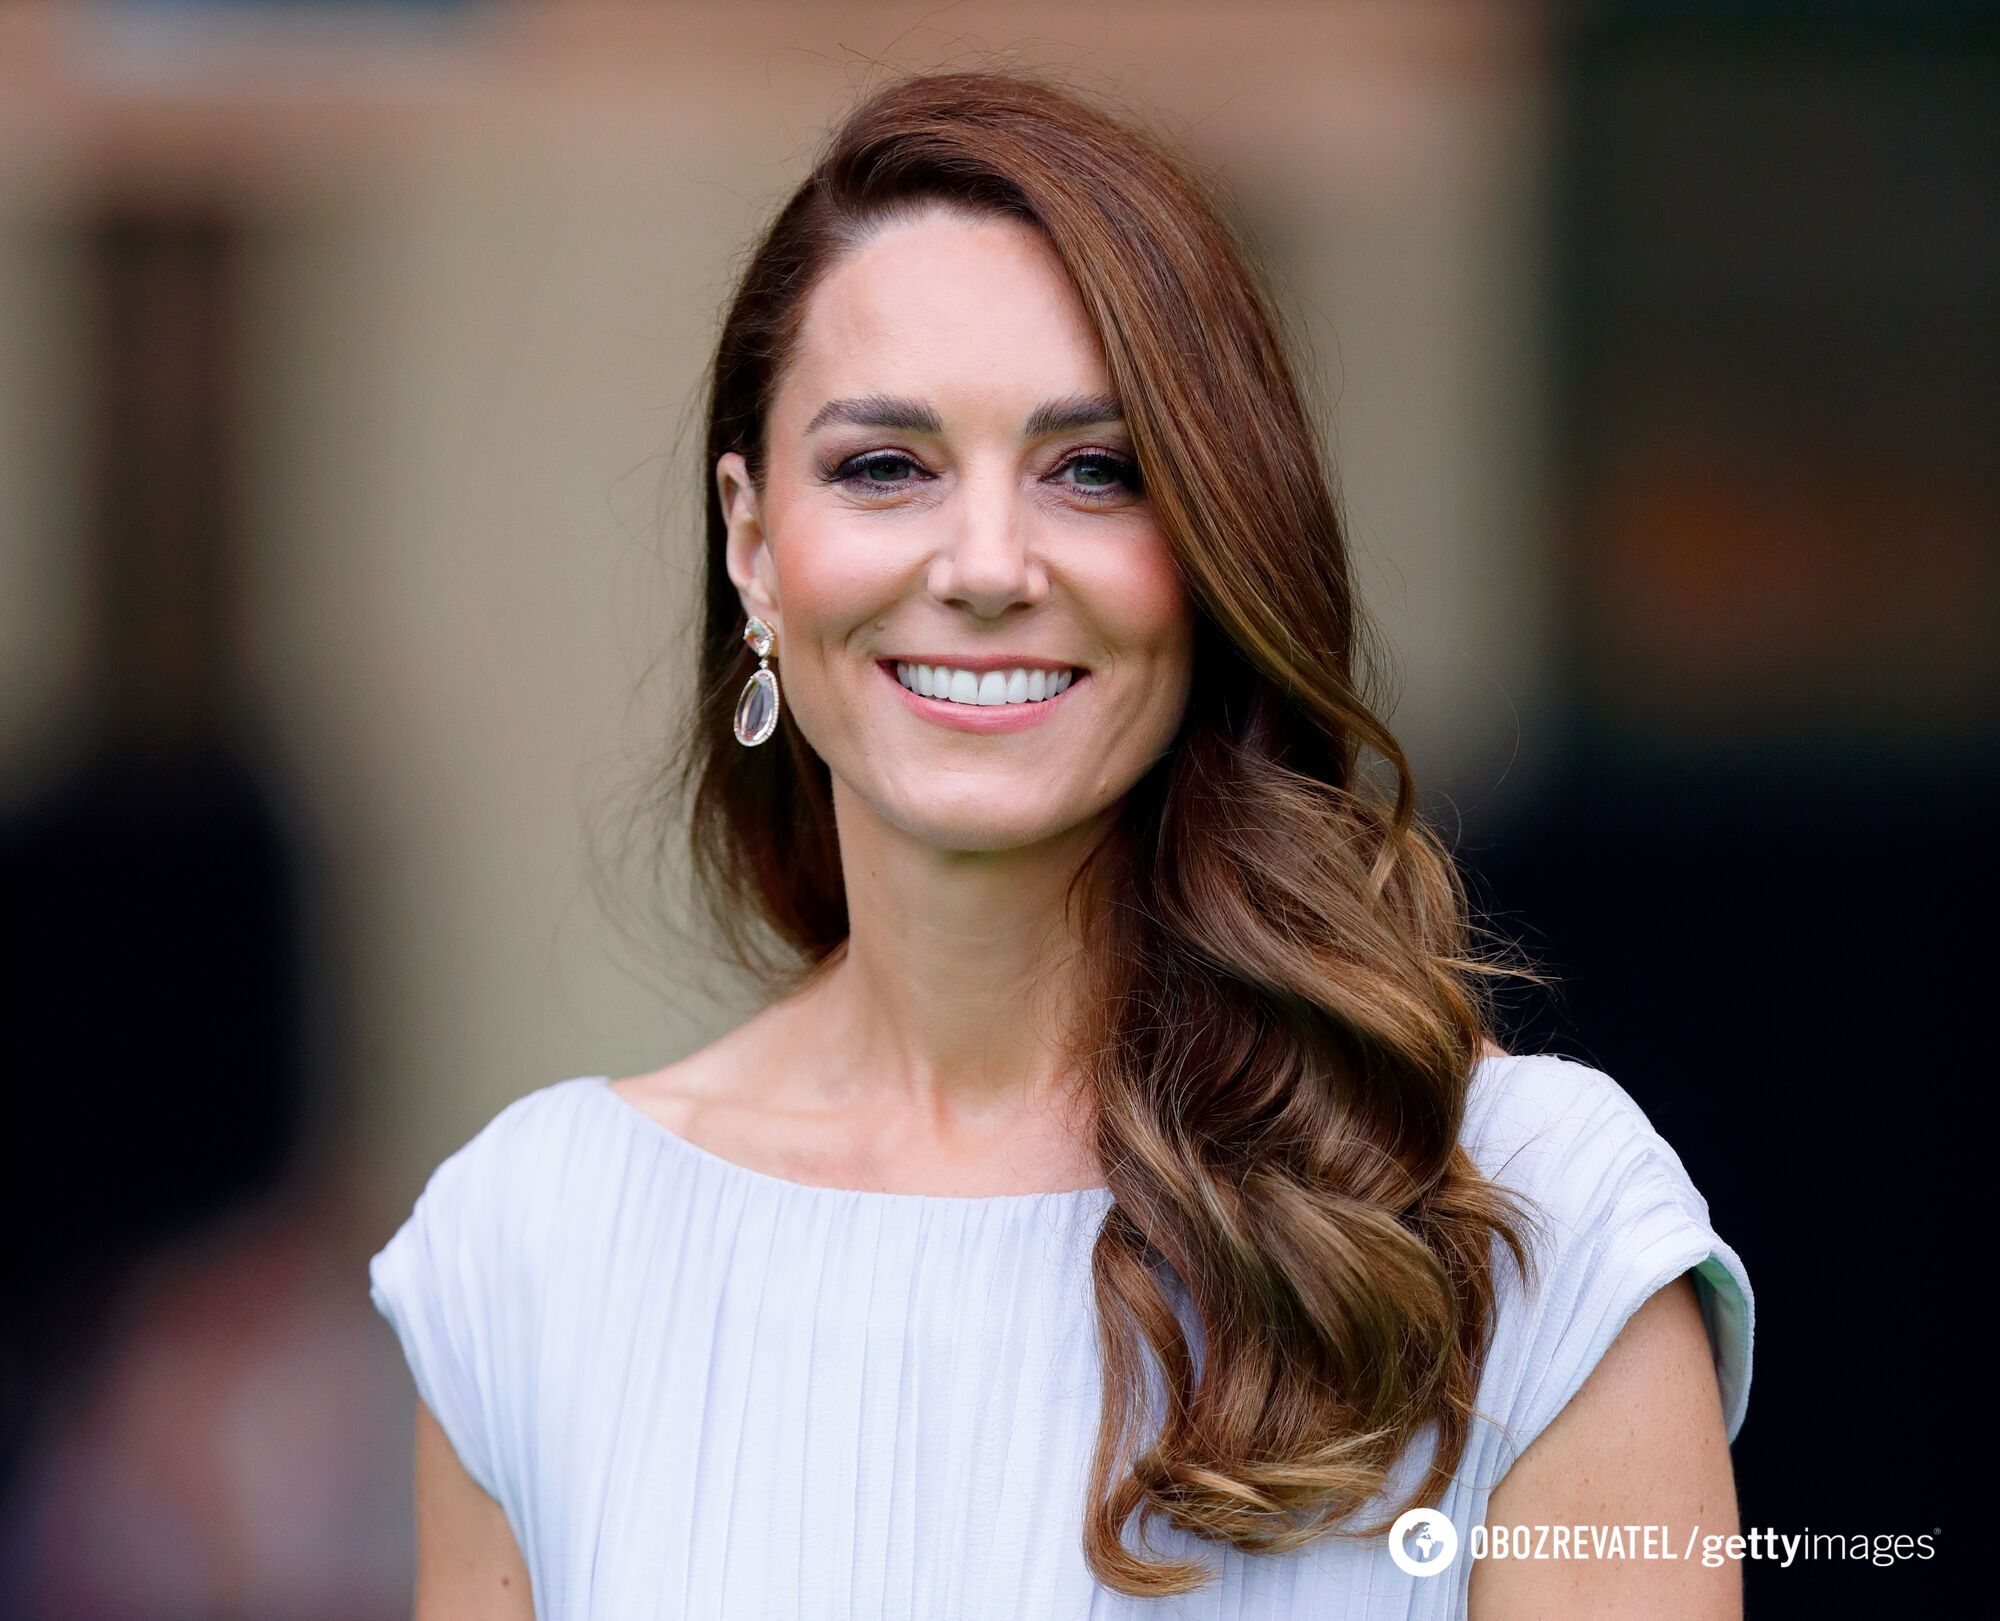 Kate Middleton was first spotted on the street after rumors of Prince William's infidelity and health problems